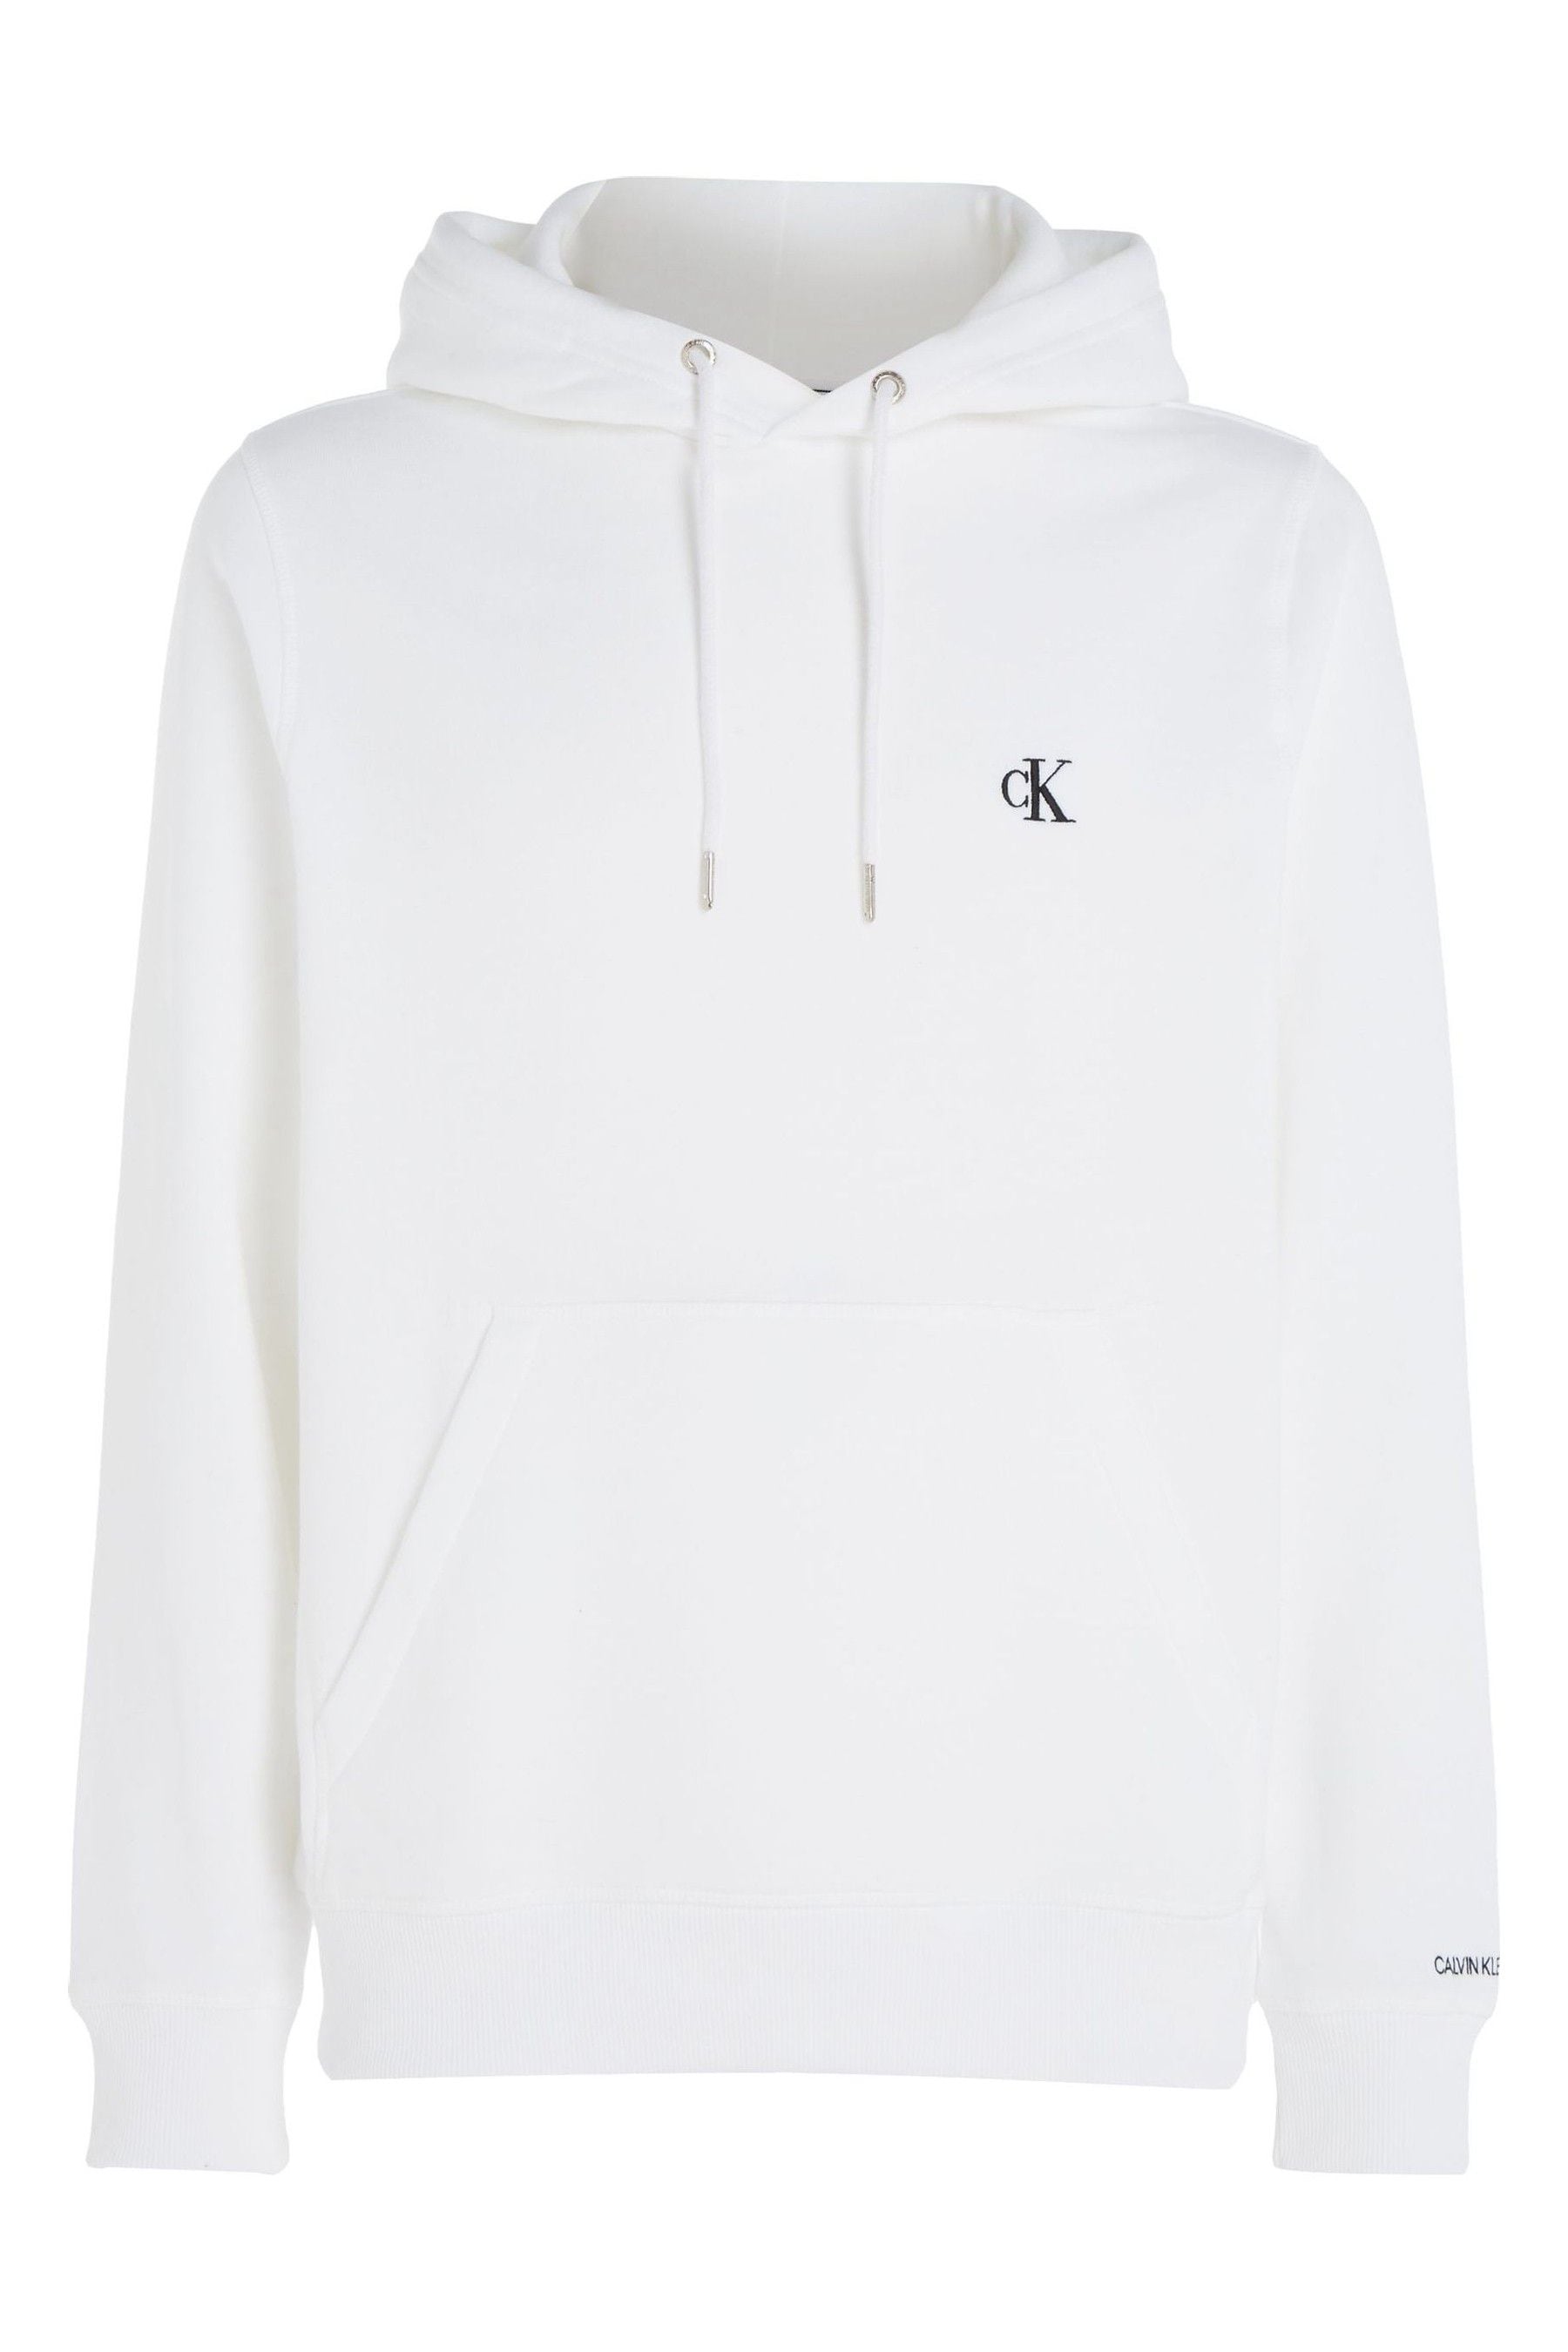 Buy Calvin Klein Jeans Essential Logo Hoodie from the Next UK online shop